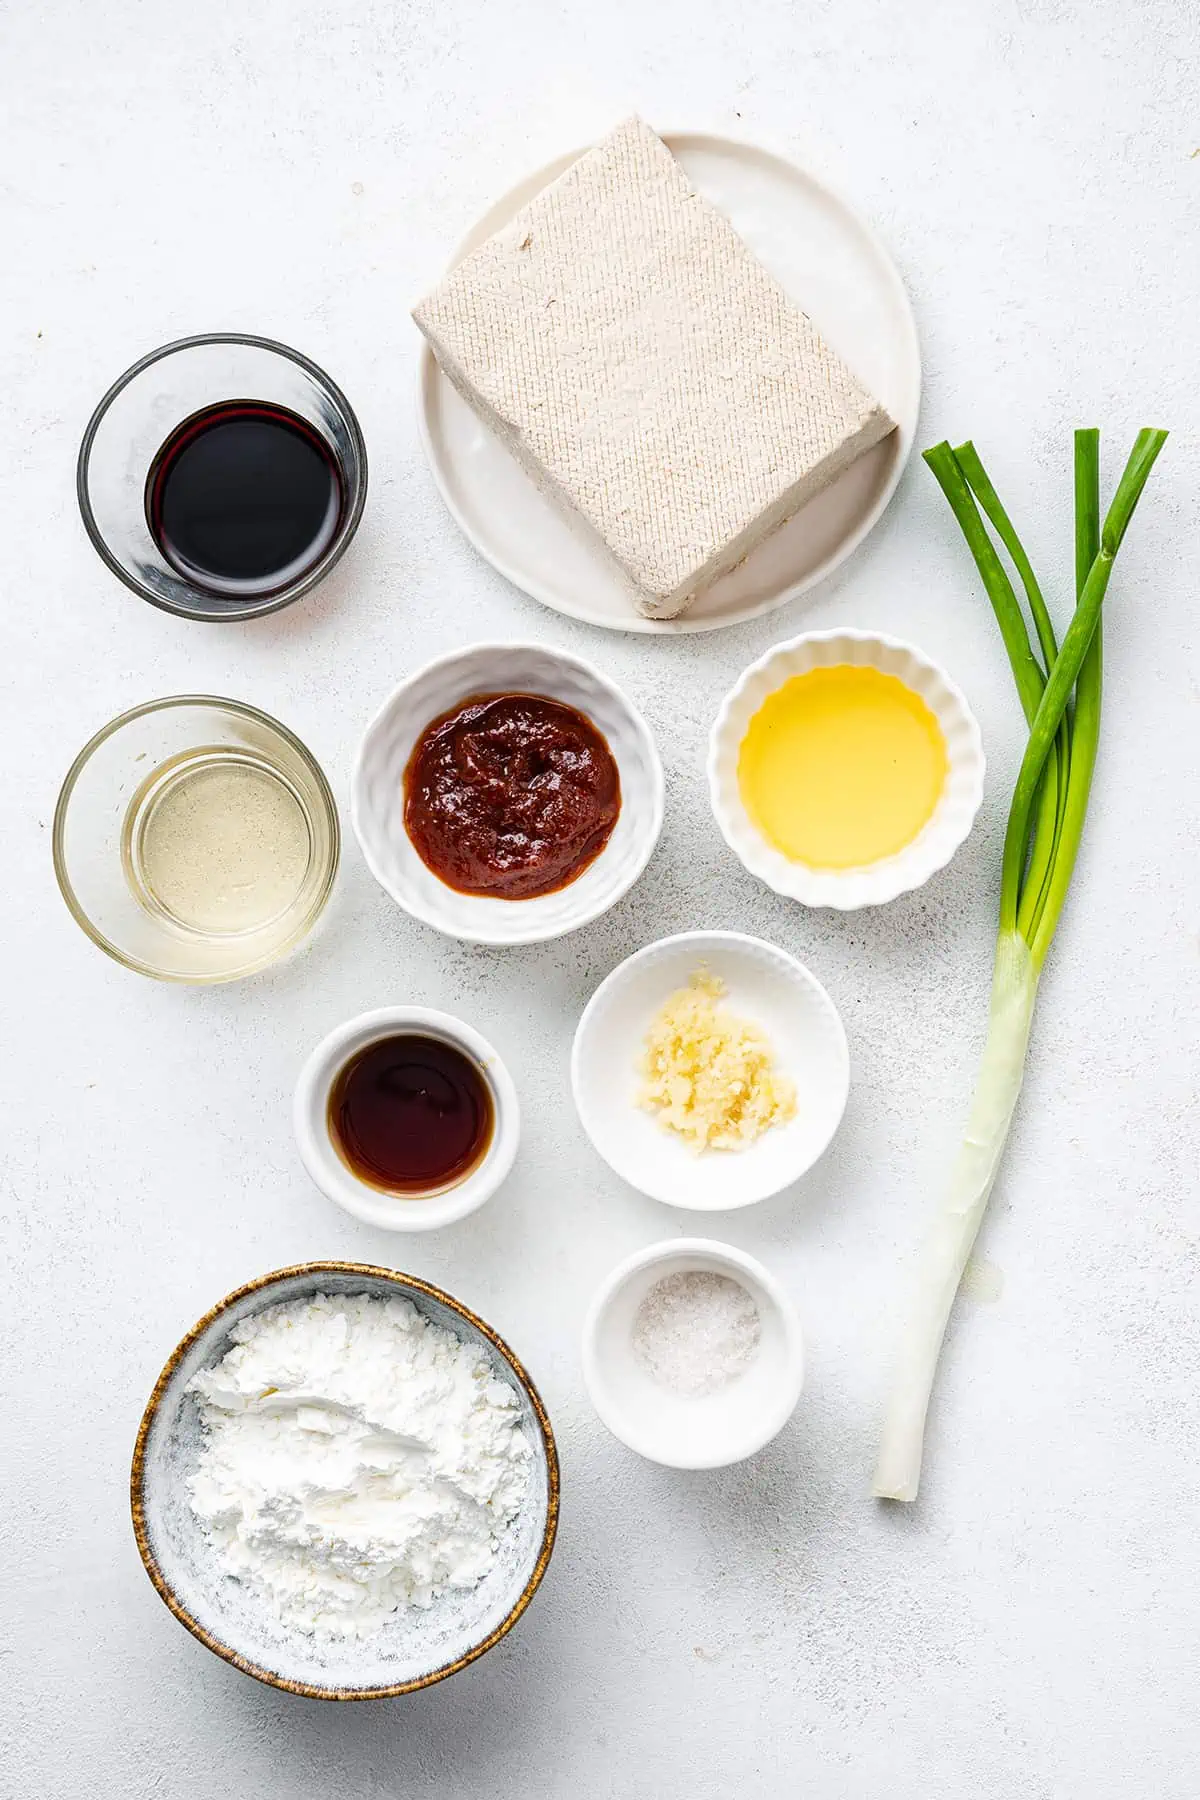 Overhead view of the ingredients needed for Korean tofu: a block of tofu, a green onion, a bowl of soy sauce, a bowl of vinegar, a bowl of gochujang, a bowl of sesame oil, a bowl of garlic, a bowl of salt, a bowl of cornstarch, and a bowl of maple syrup